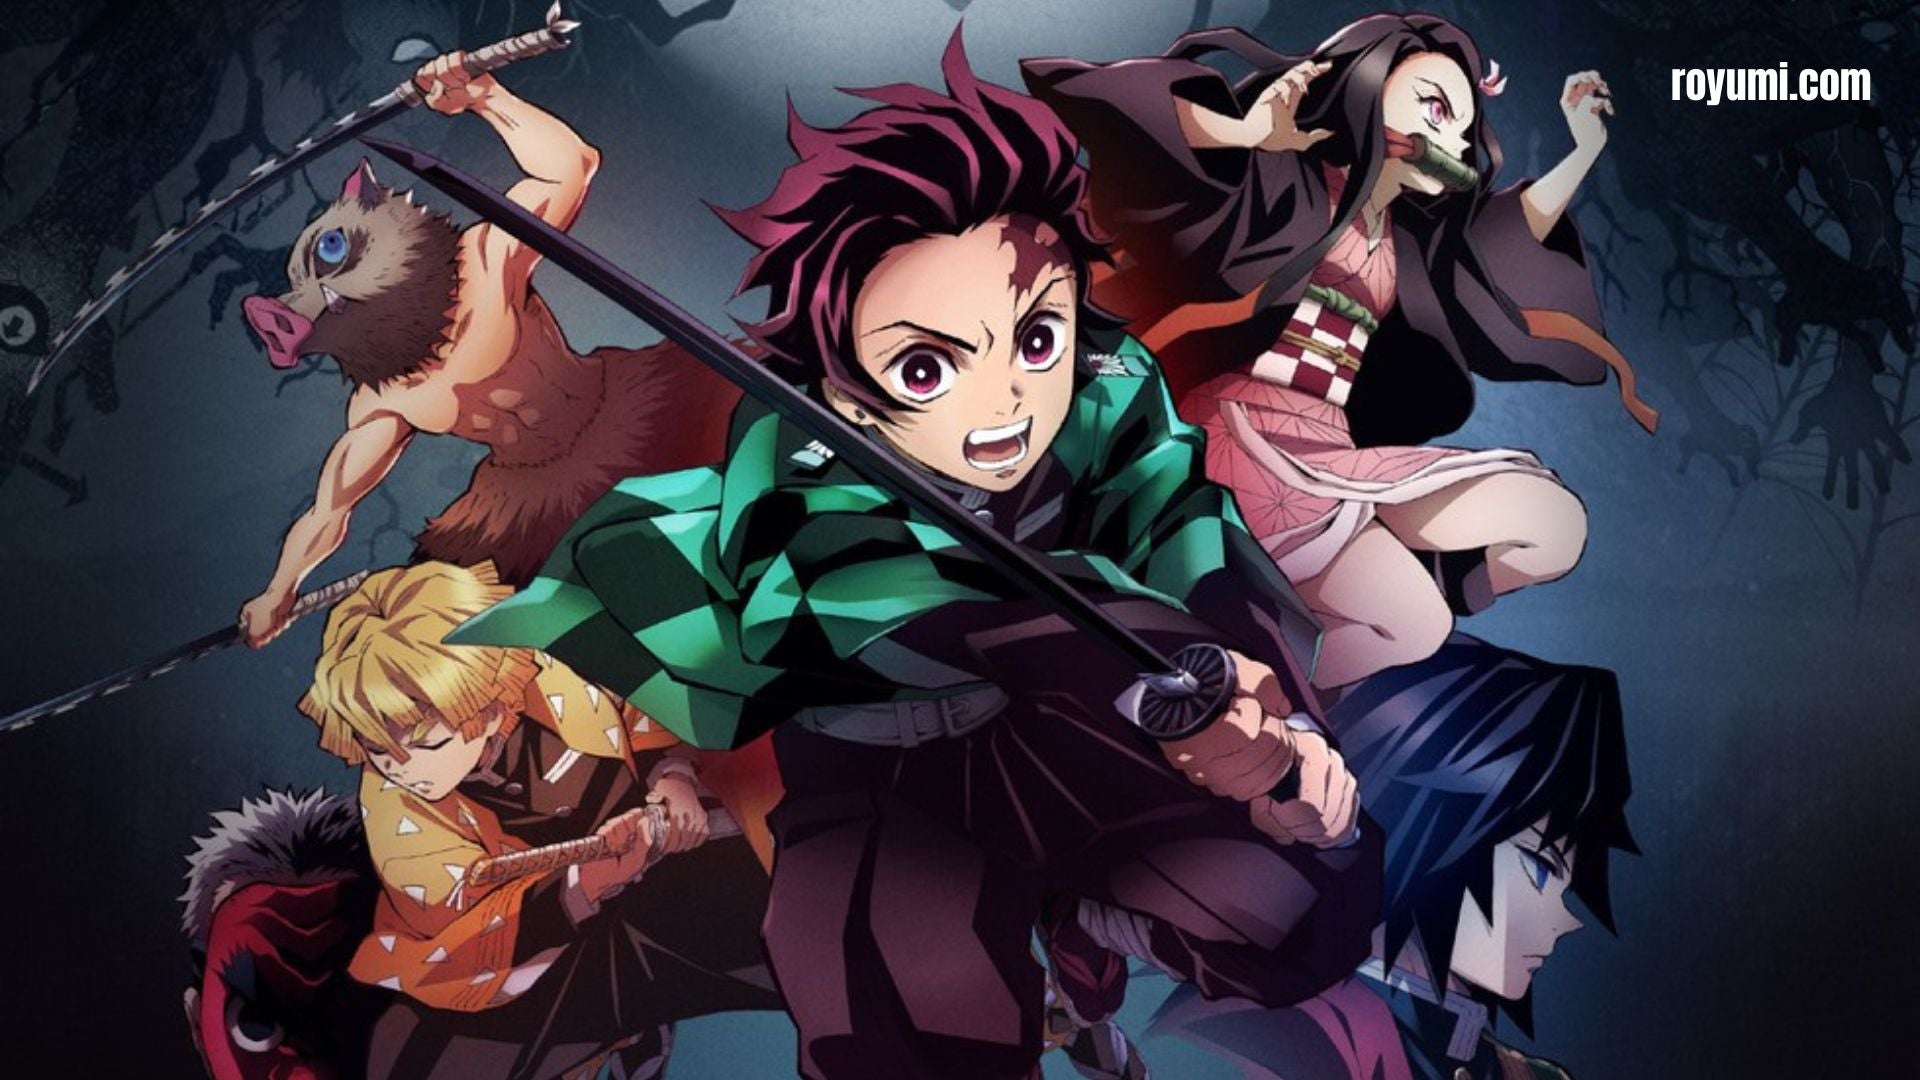 Valuable Lessons We Can Learn From Kimetsu no Yaiba Anime